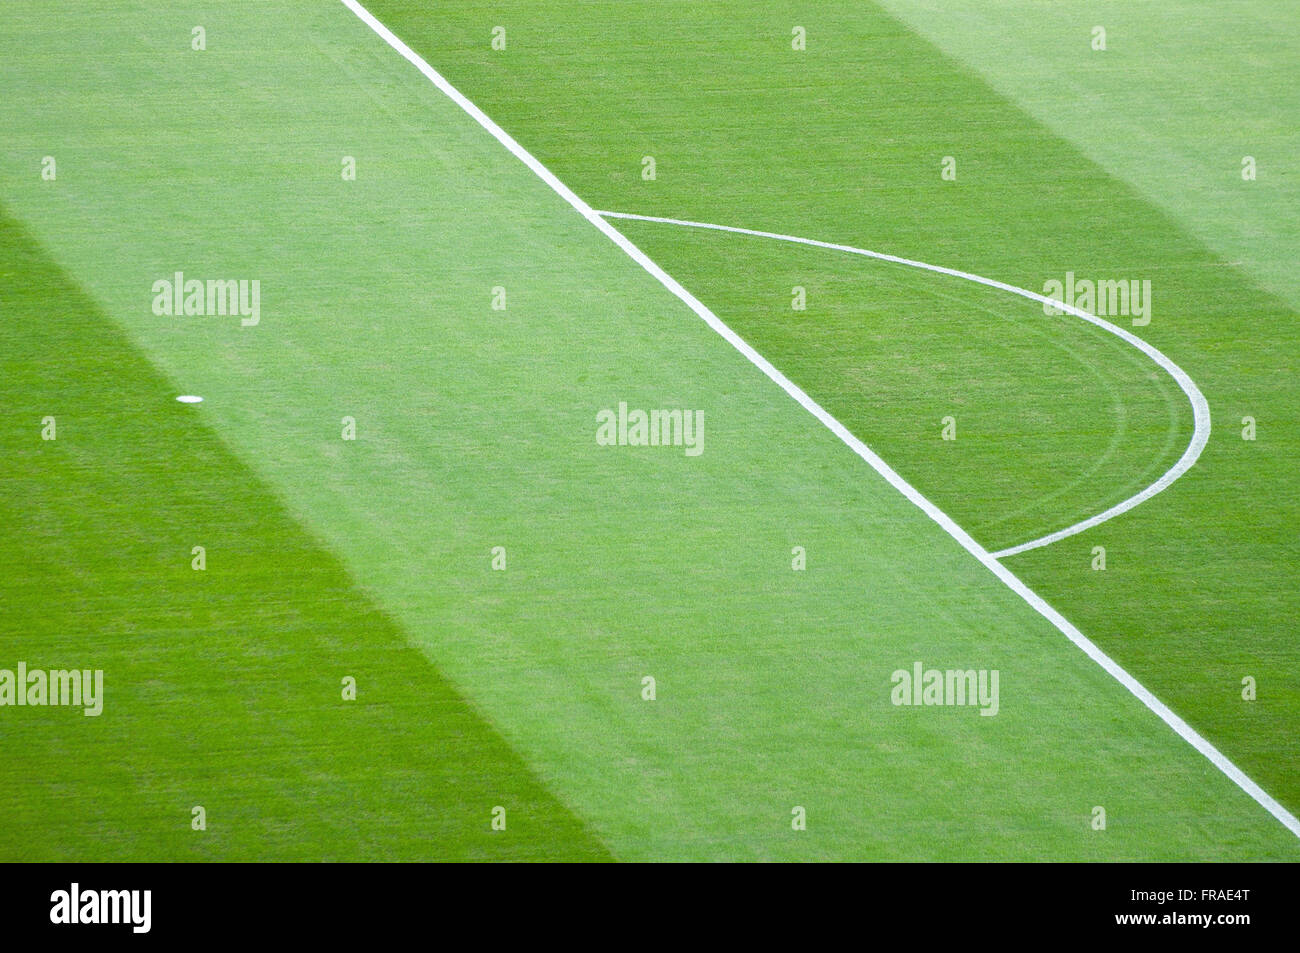 Football field of Estadio do Maracana renovated in the game between the national teams of Mexico and Italy Stock Photo